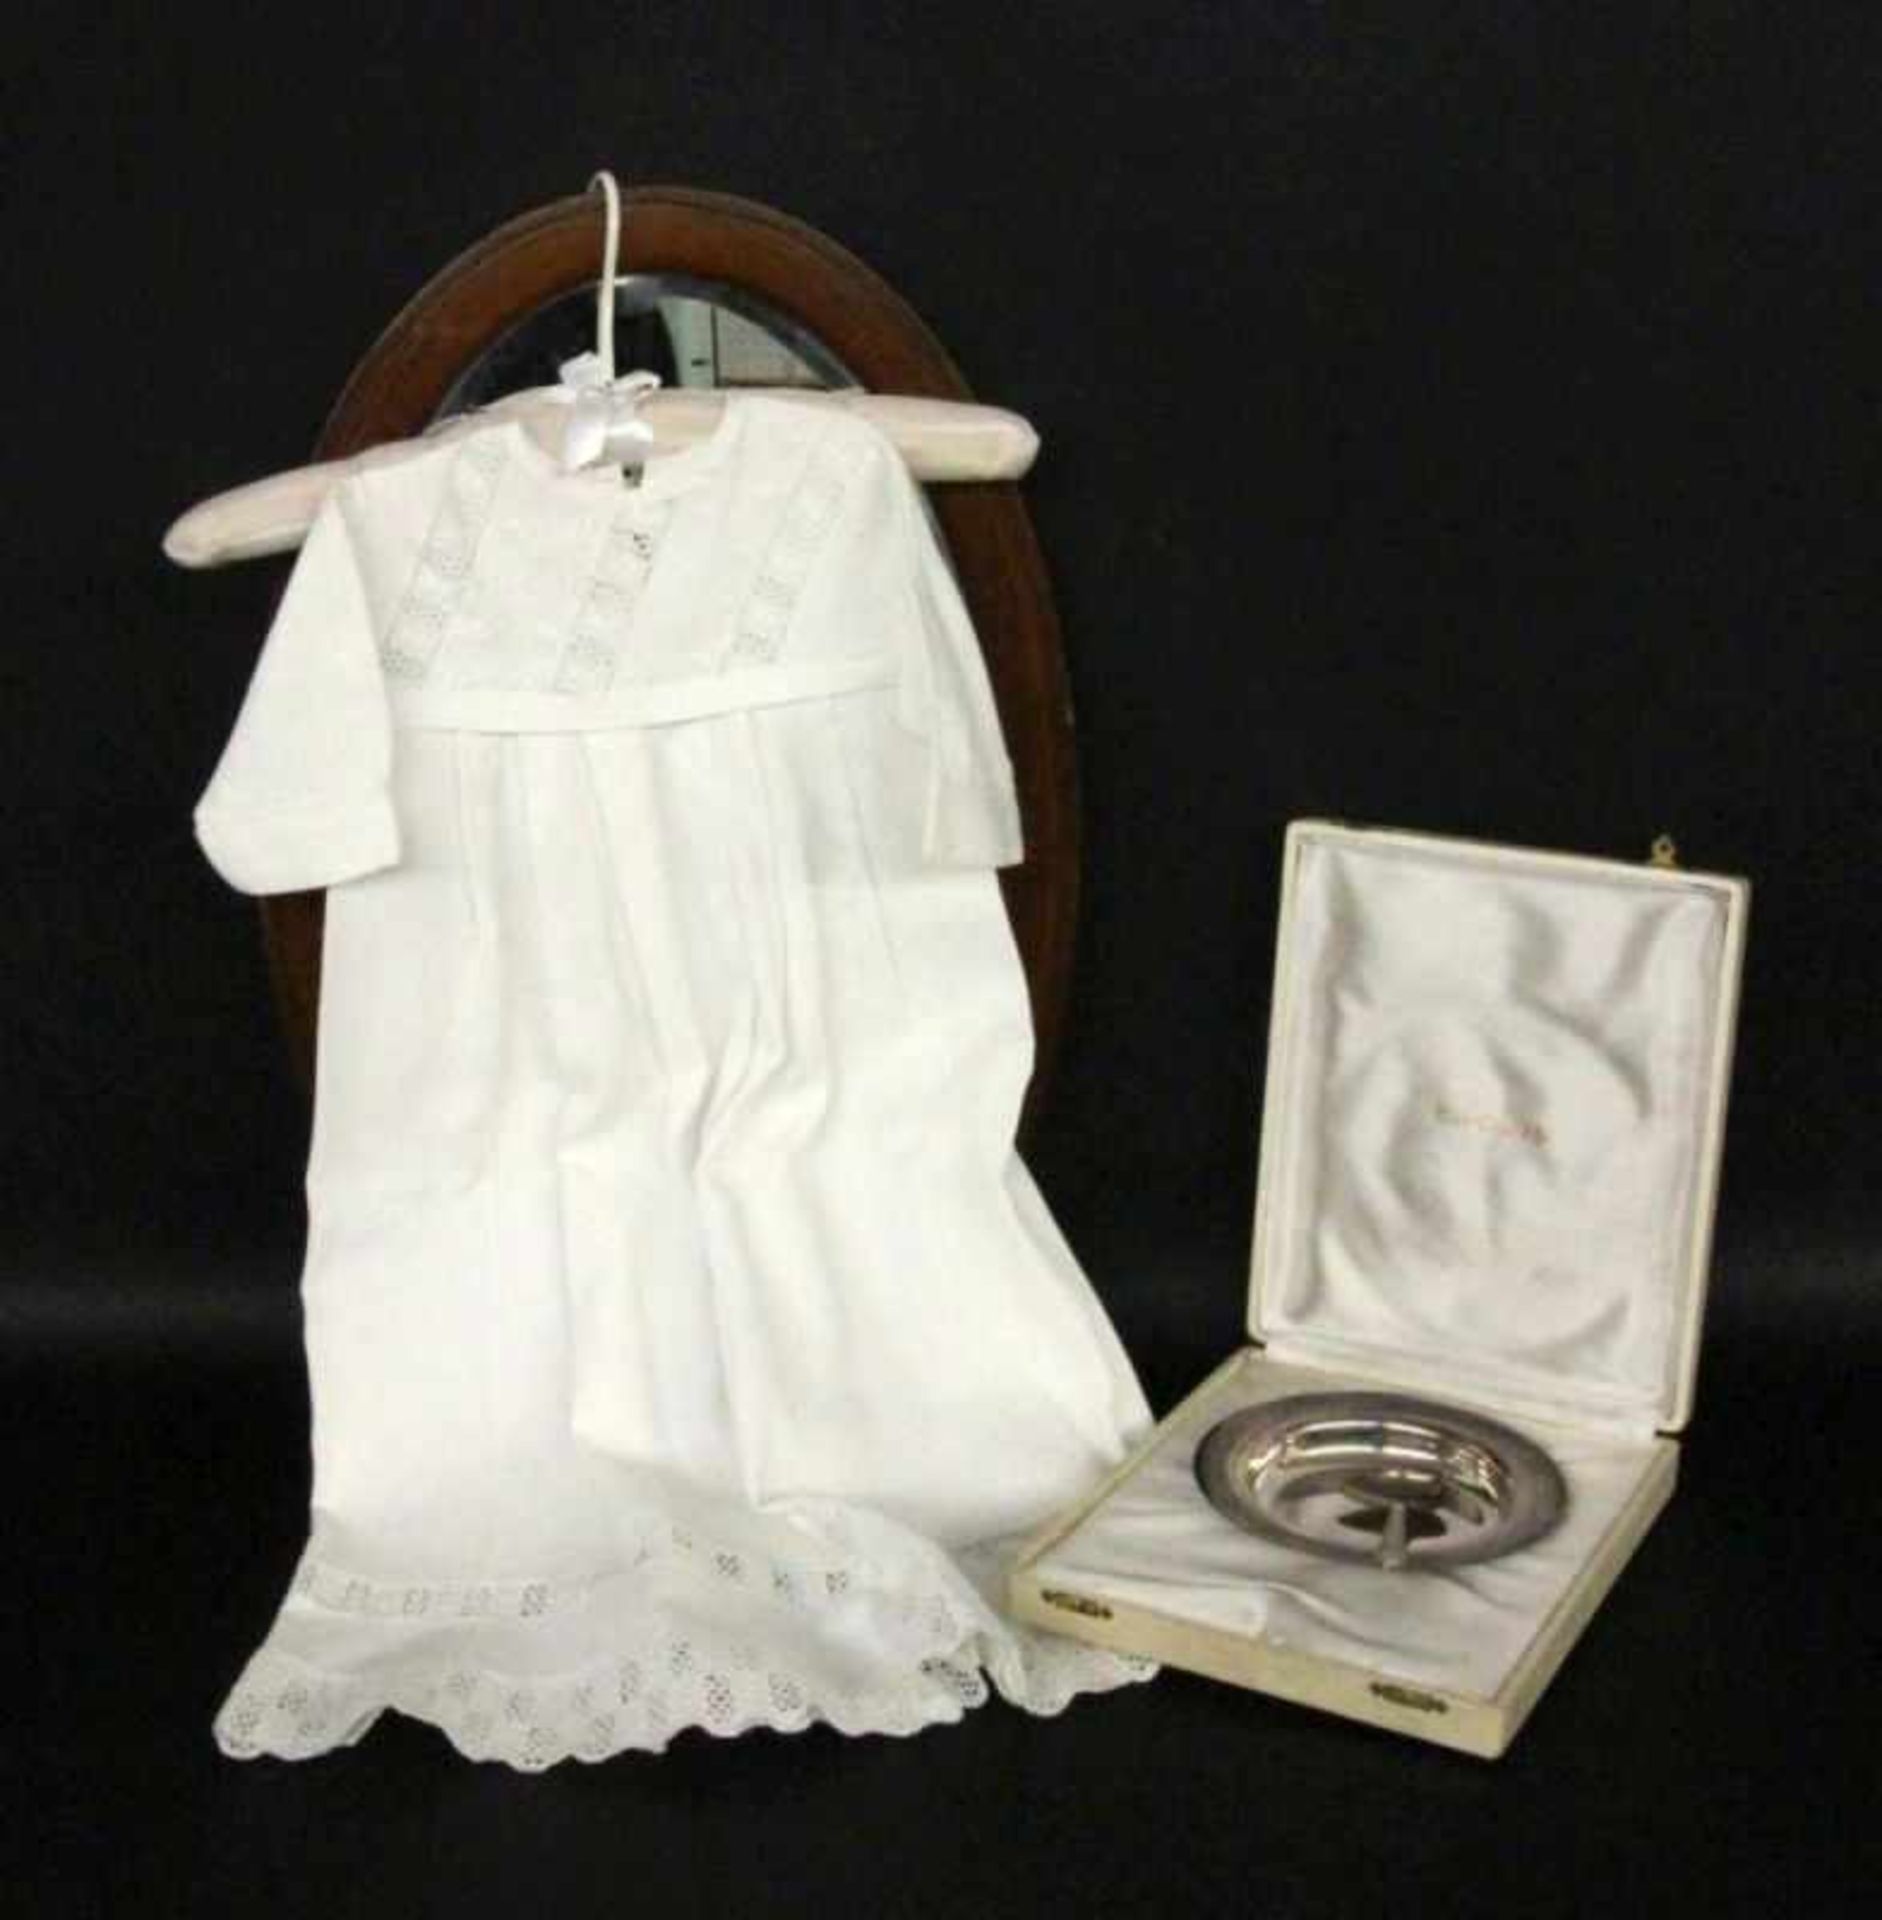 ''AN OLD CHRISTENING GOWN, white with lace trim. 65 cm long. Includes a silver-plated